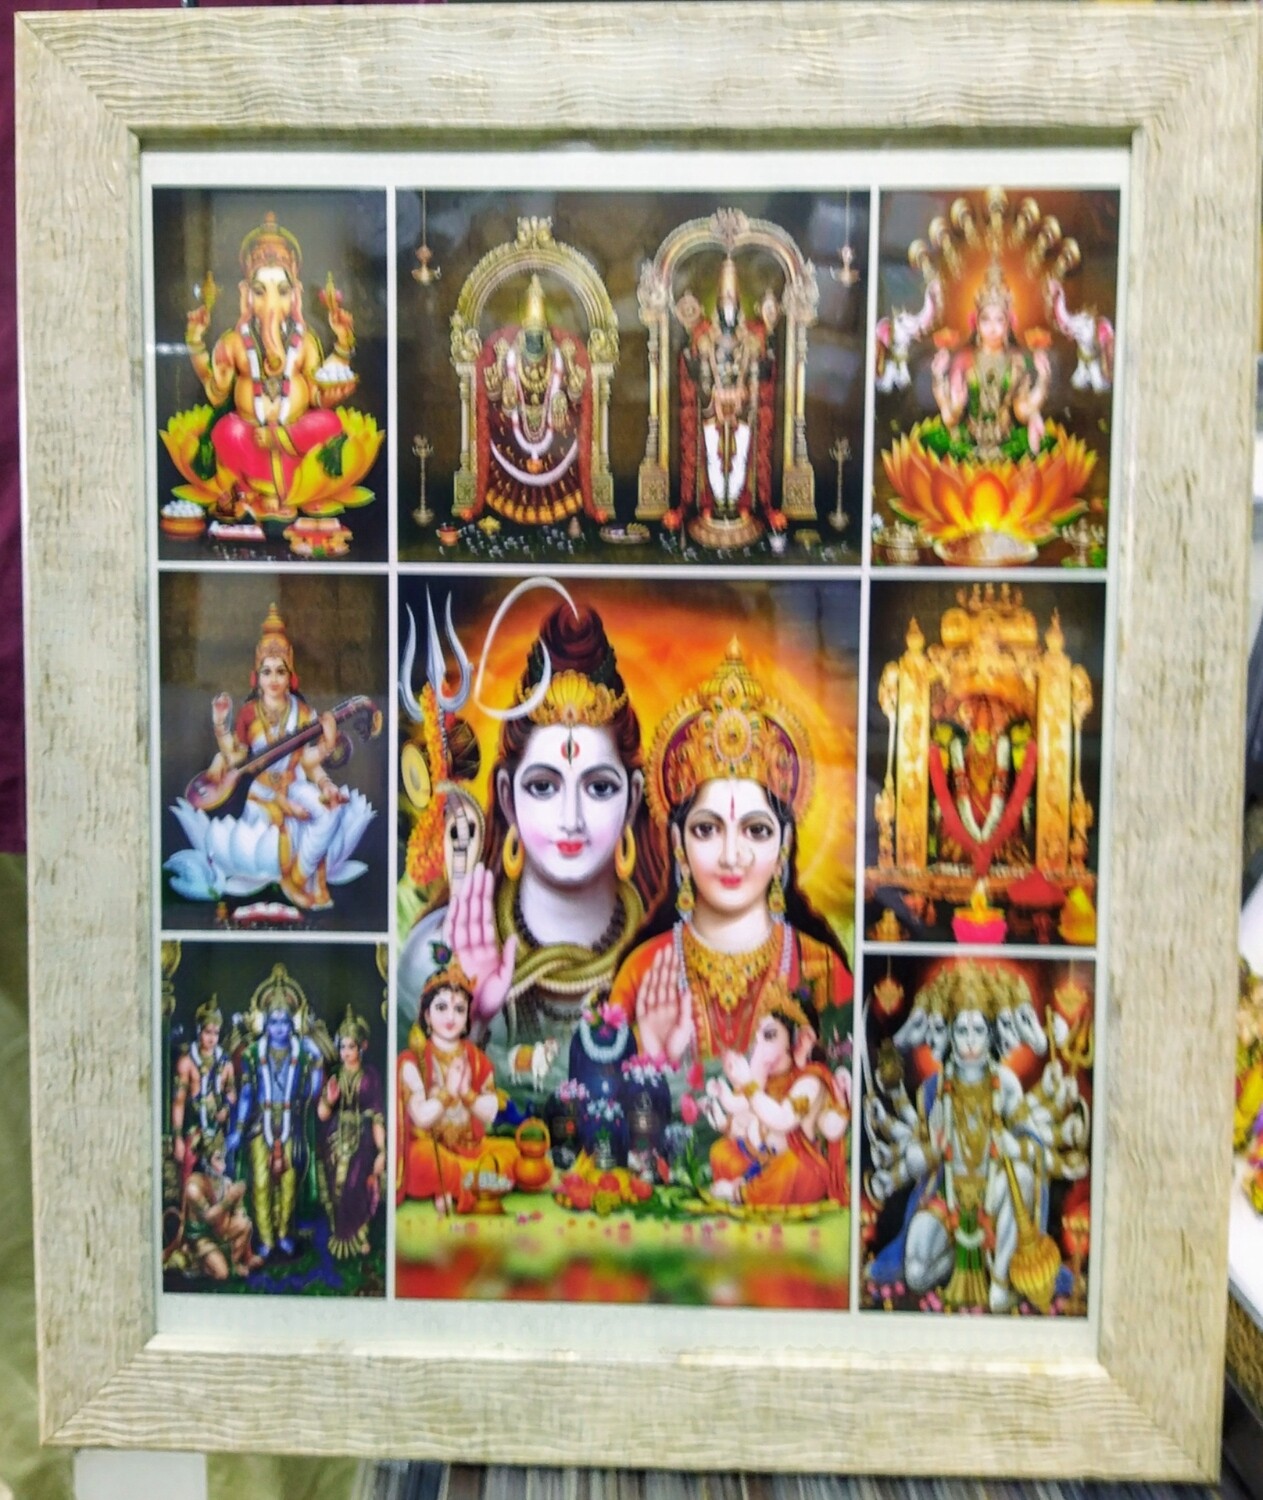 All in One Hindu God images - Photoframes